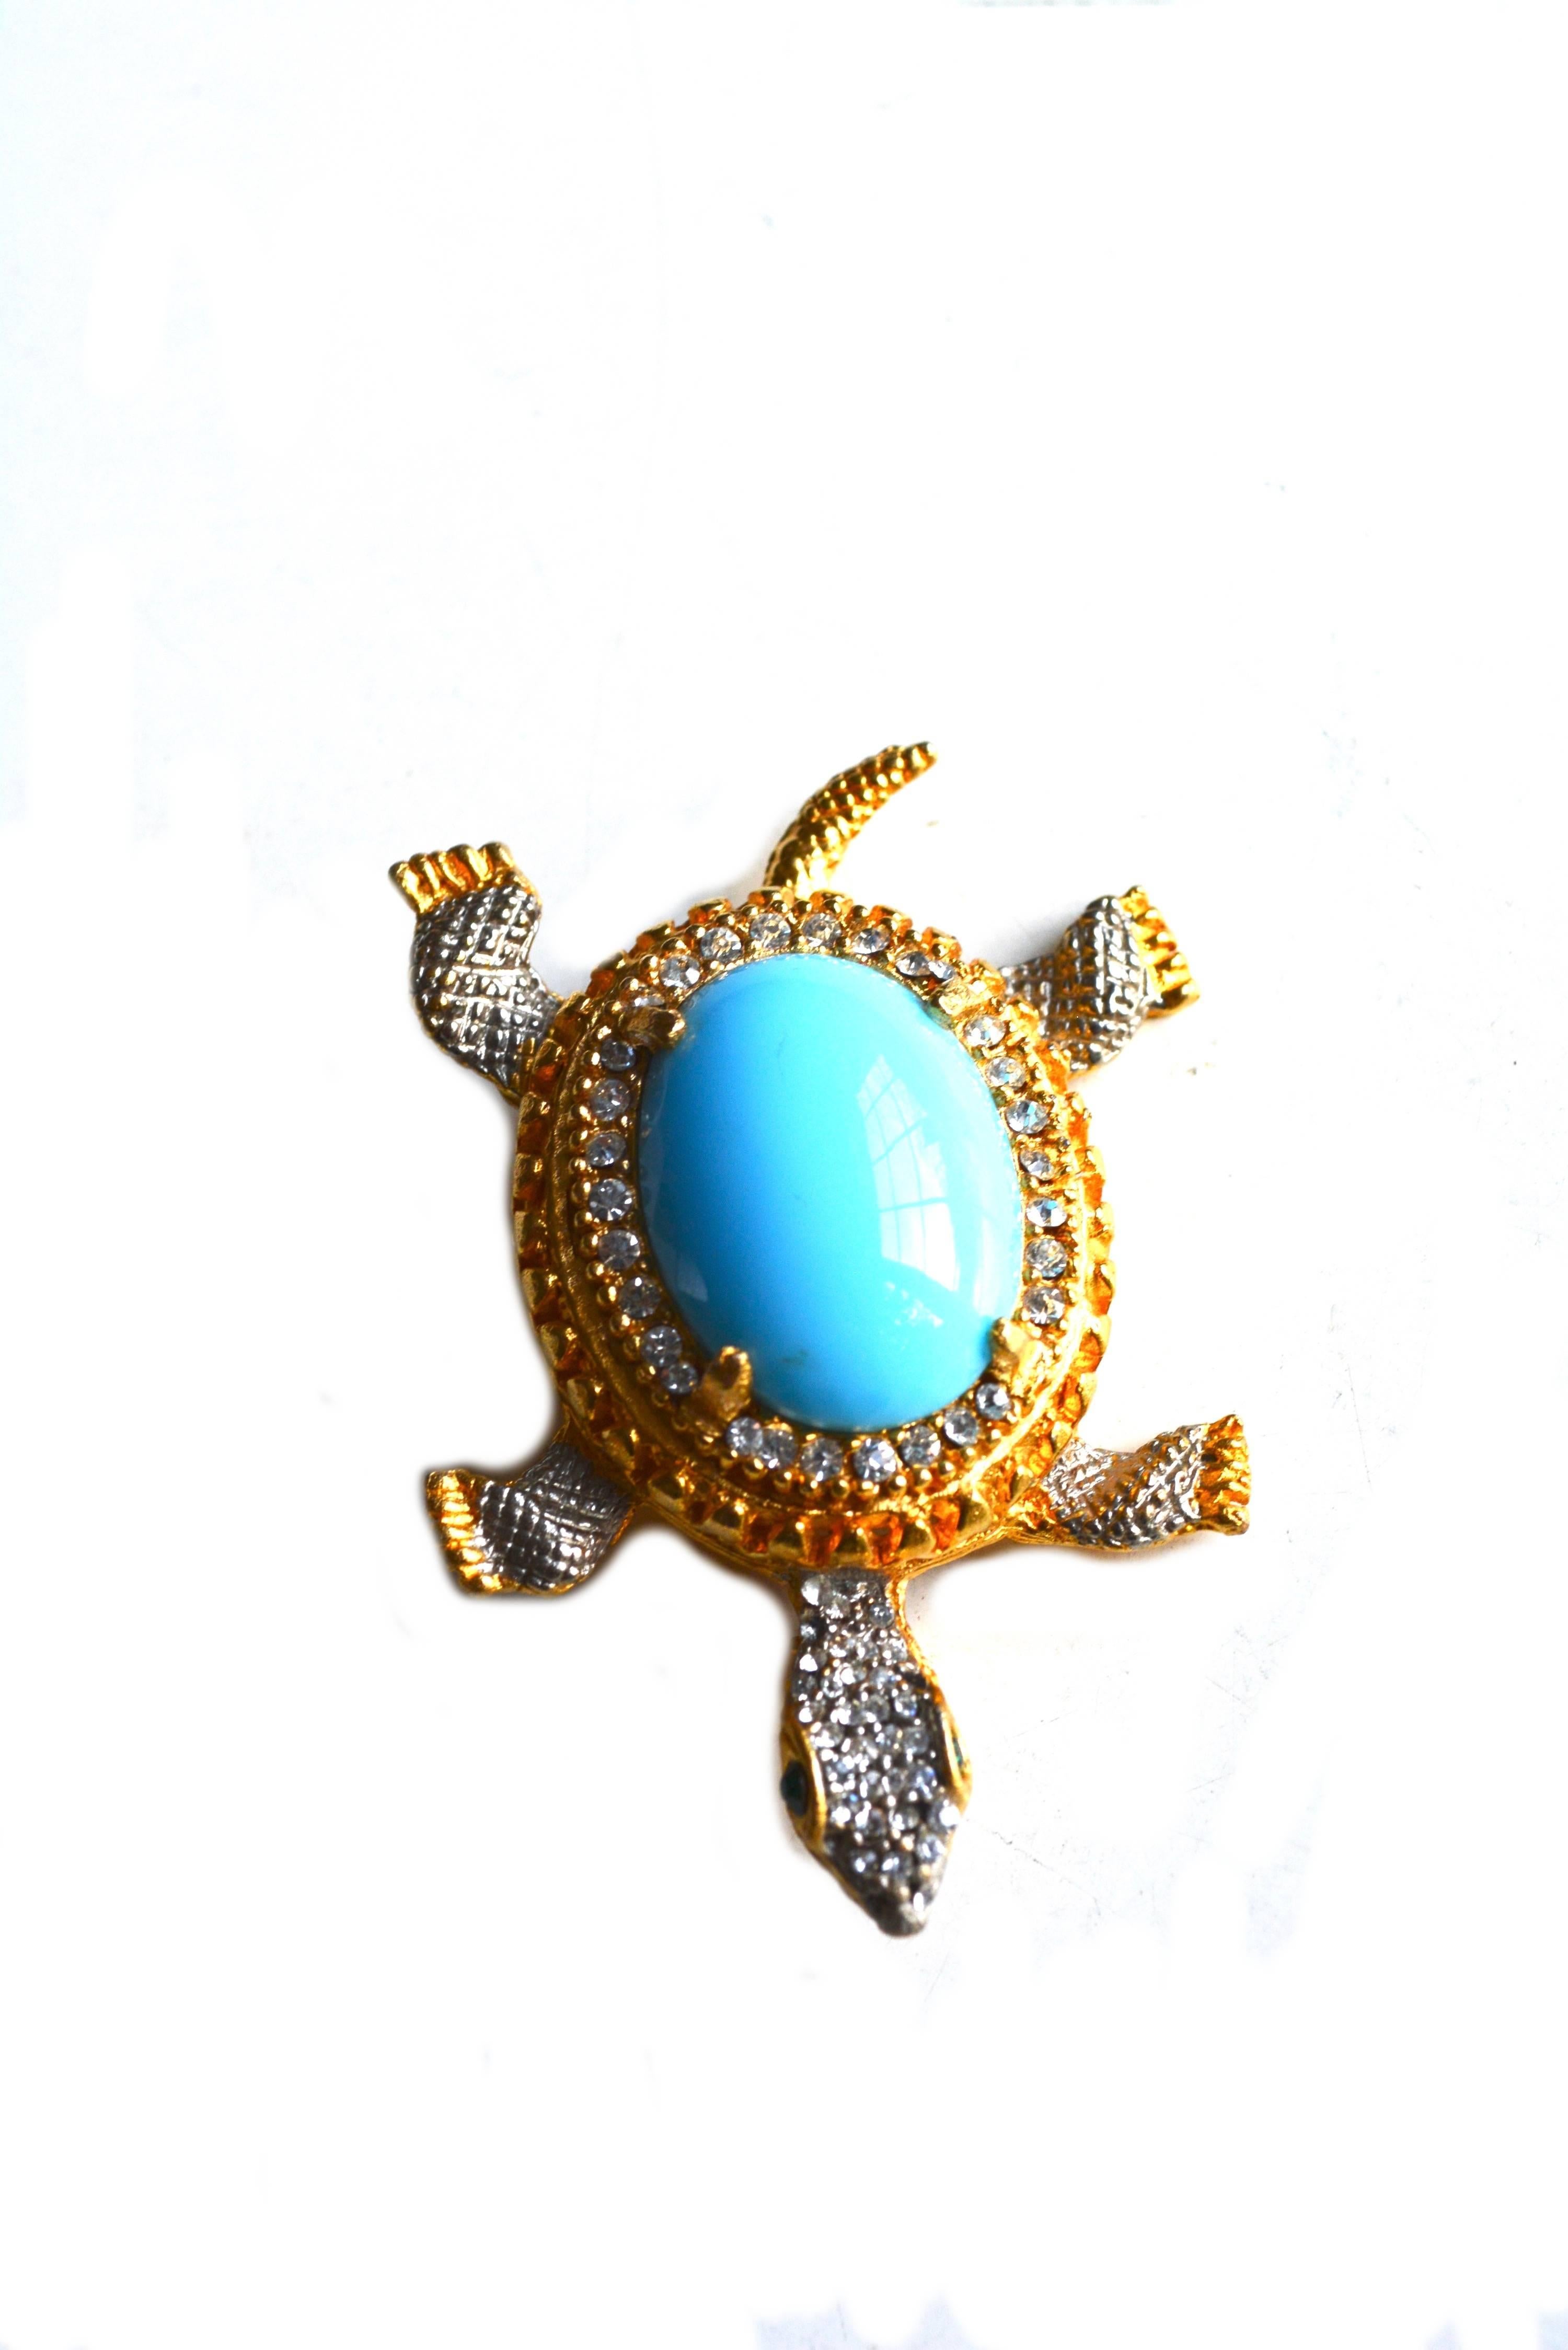 Turquoise lucite turtle brooch, circa 1960s. Signed K.J.L.  2.5" long x 2" wide. 